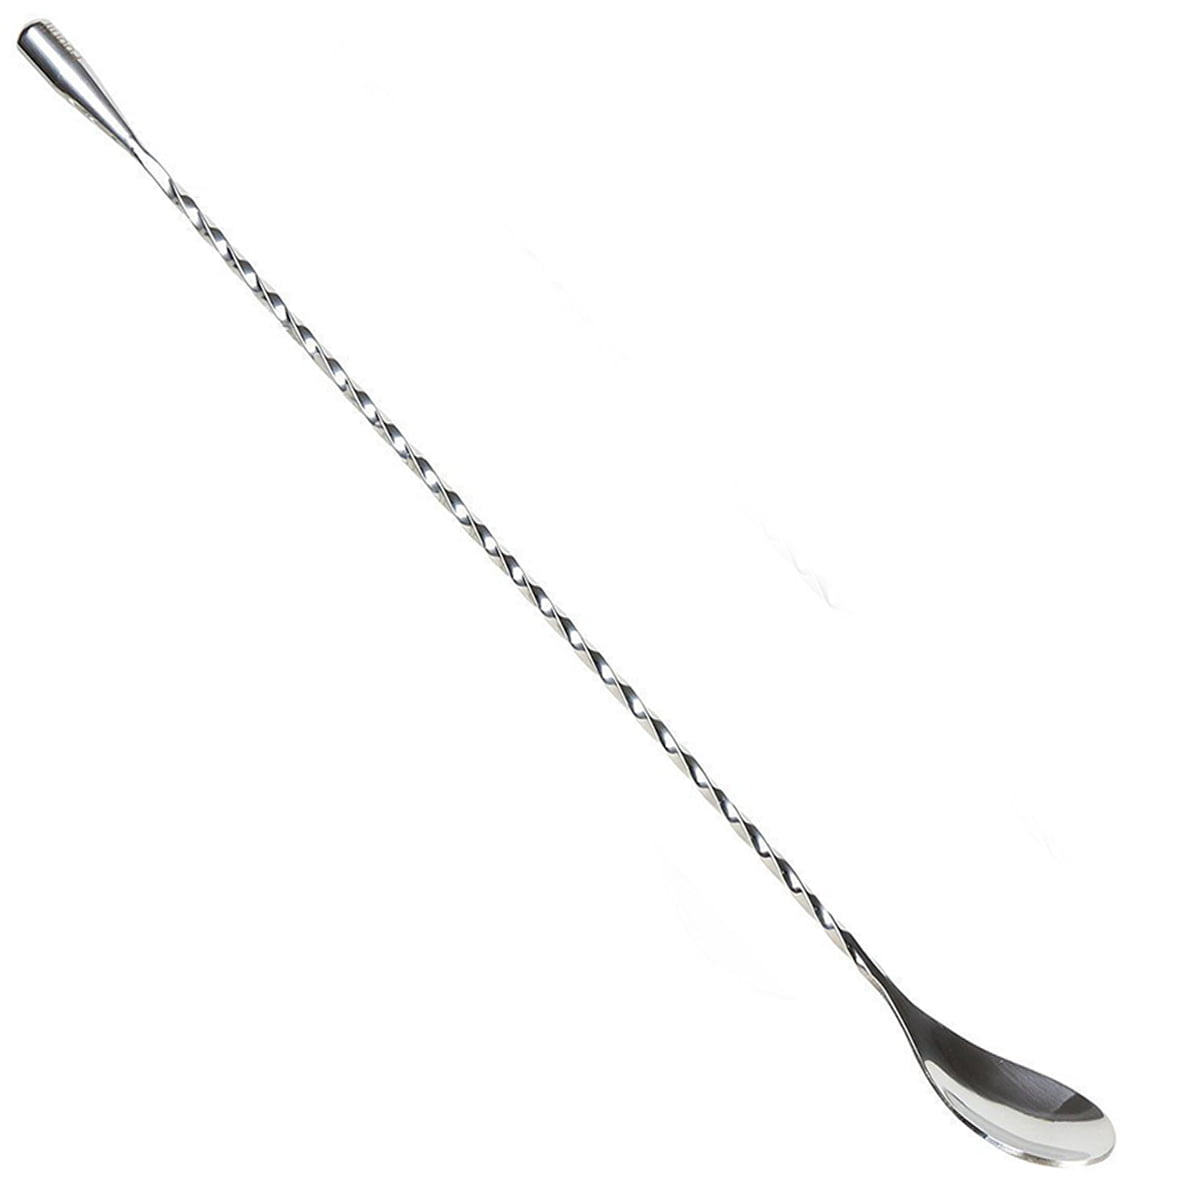 Bar Mixing Long Stainless Steel Stick Spoon Martini Stirrers 12 Inches 4PCS CASTEL Cocktail Stirring Spoon Bartender Stir Spoons 